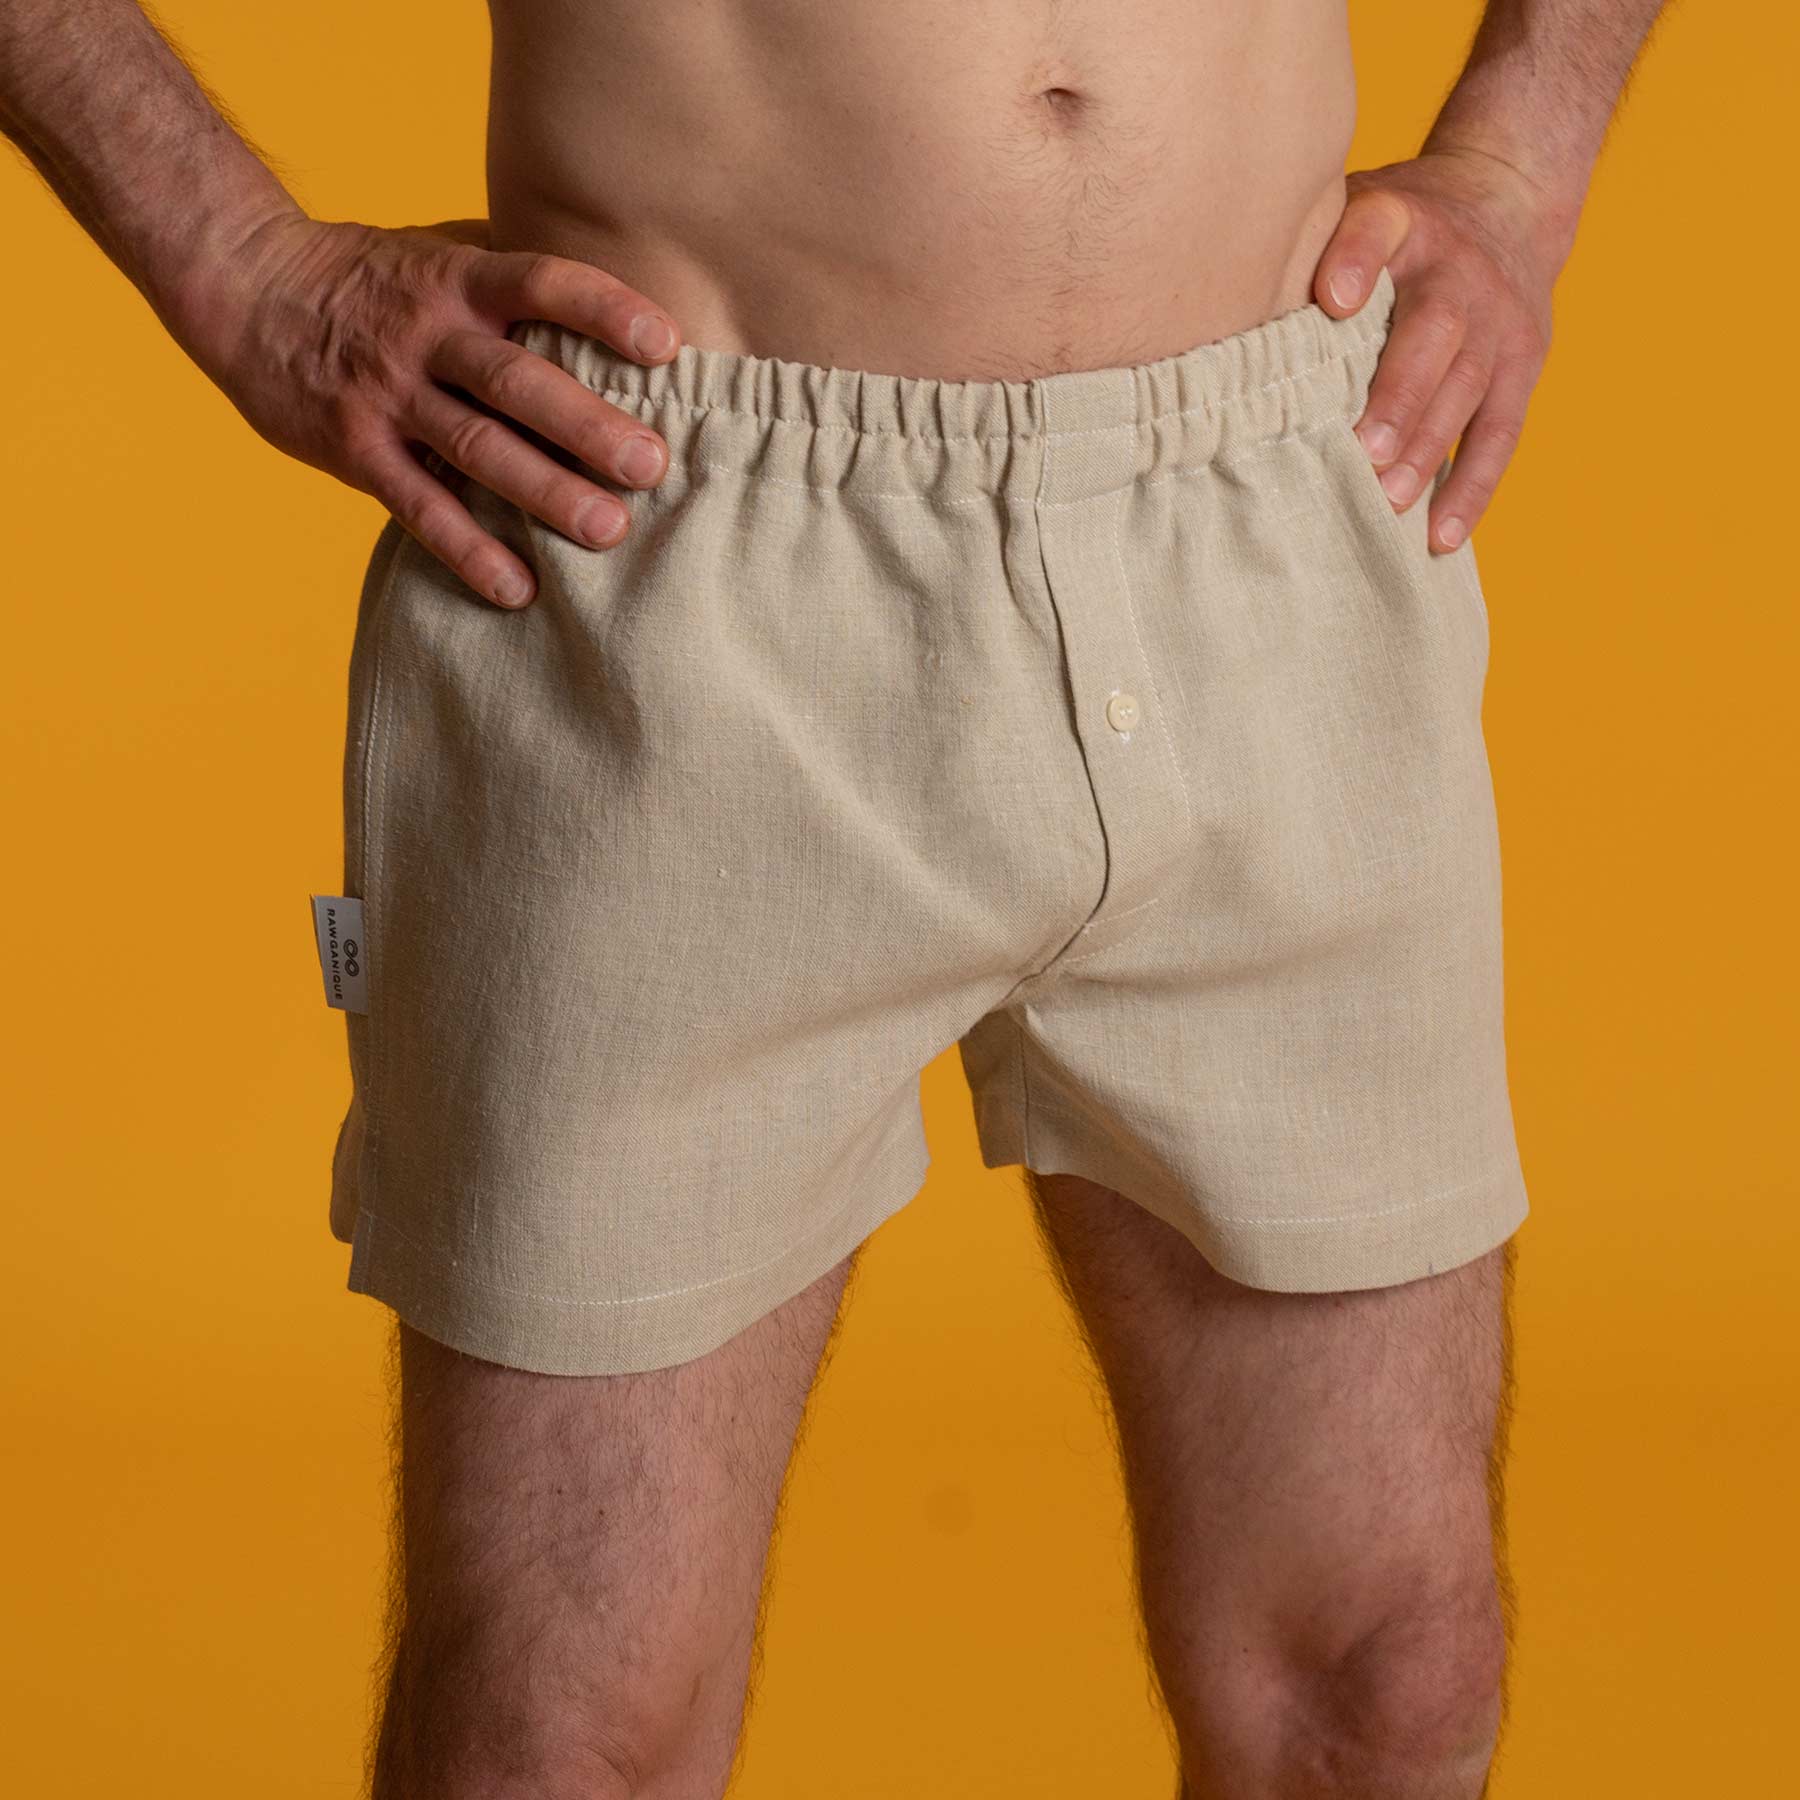  Hemp briefs with an elastic band, Loose fit boxers for